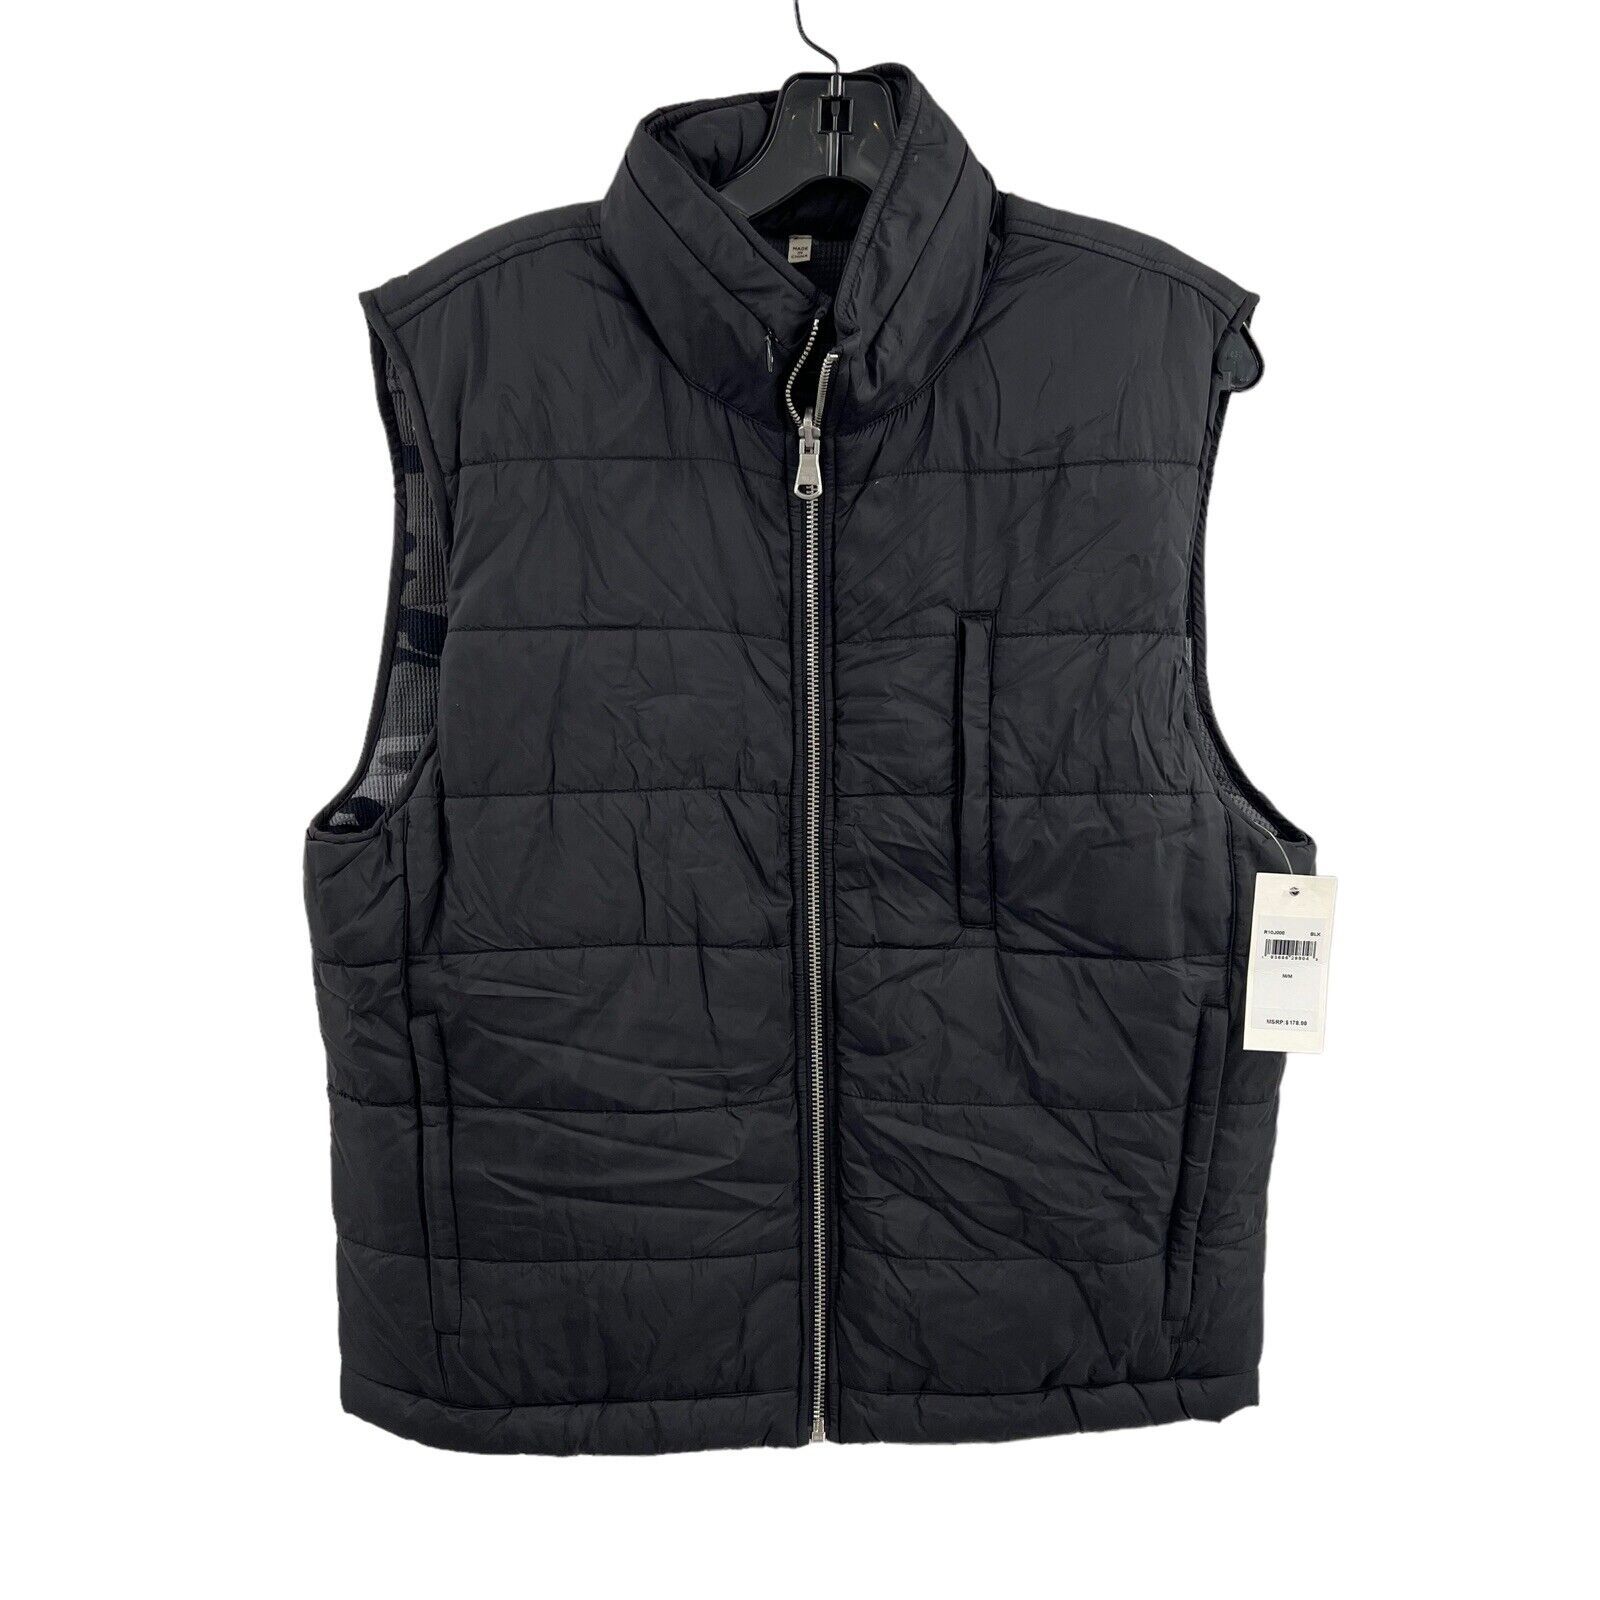 Primary image for Mills Supply Reversible Puffer Vest Size Medium New